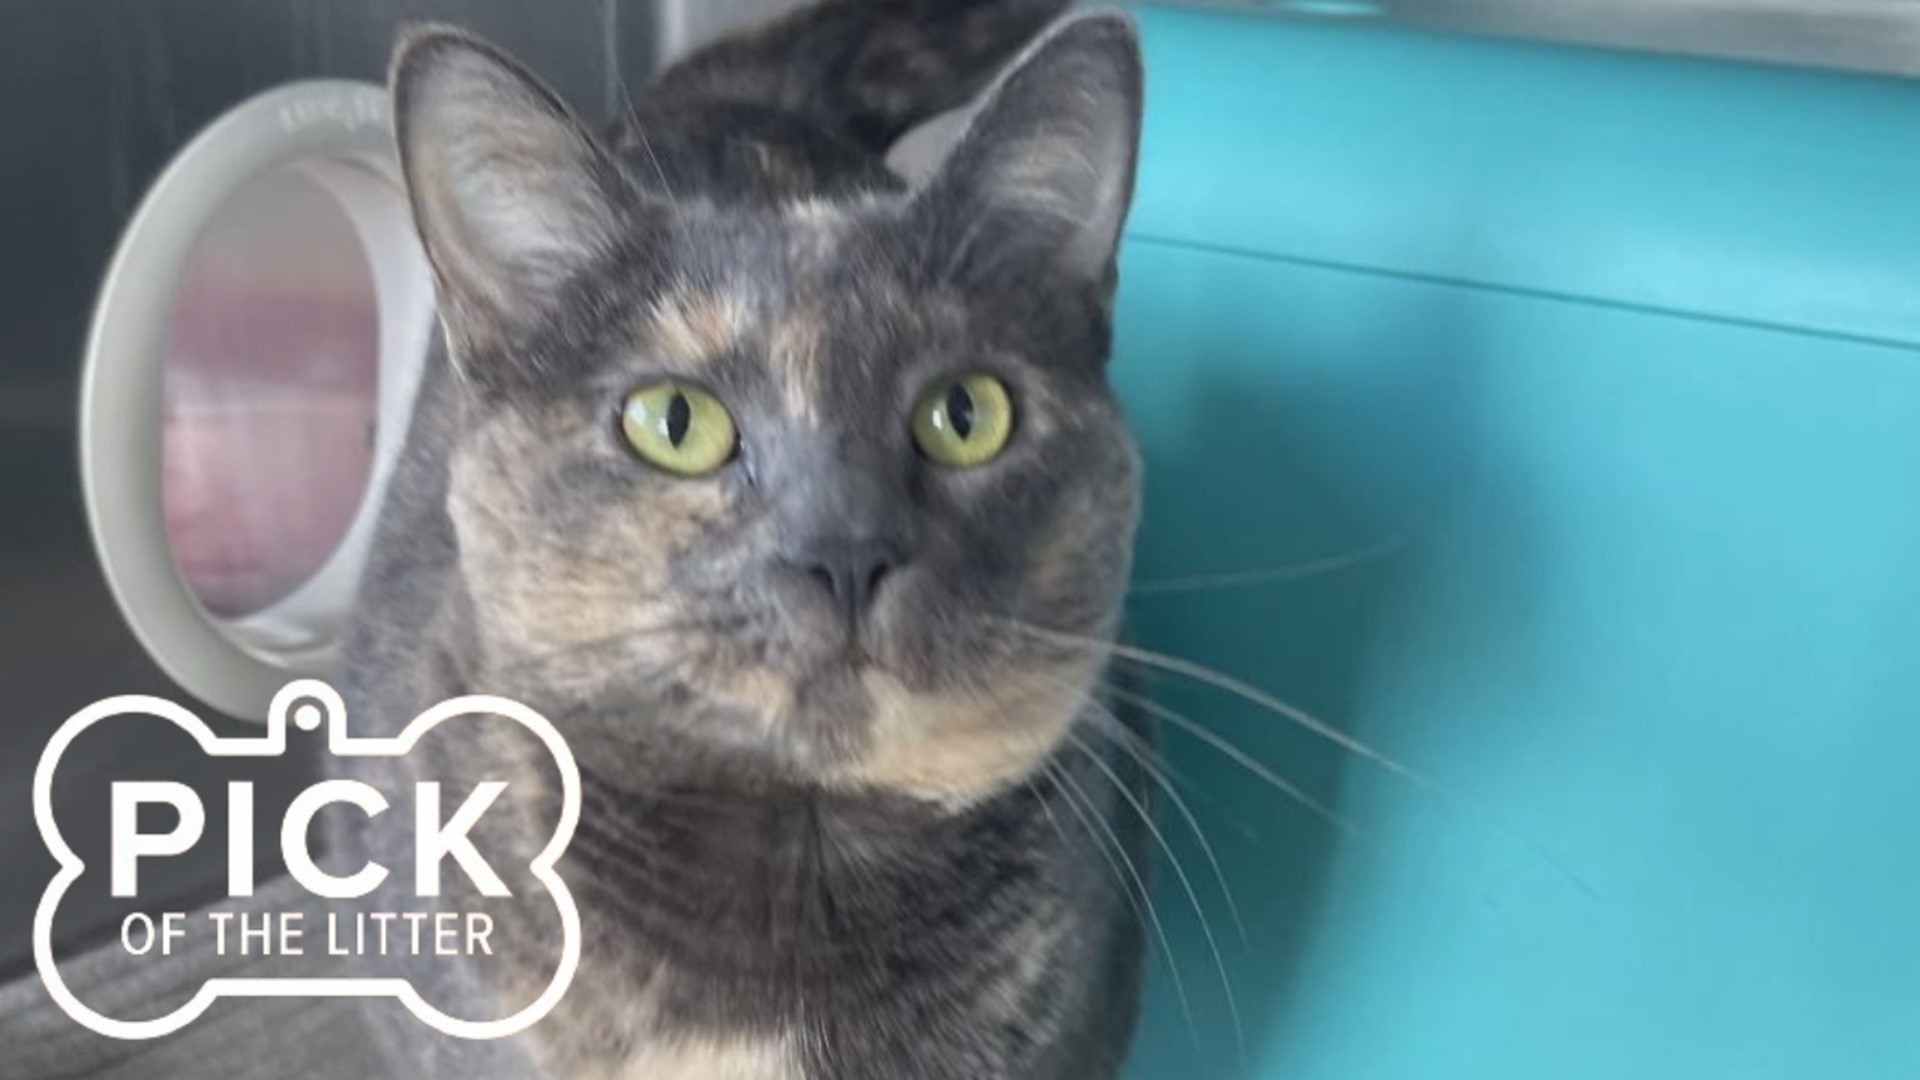 Attlerock is a three-year-old female domestic short hair Gray/Peach dilute Tortoiseshell cat. She is good with kids, other cats and dogs. She is also litter box trai